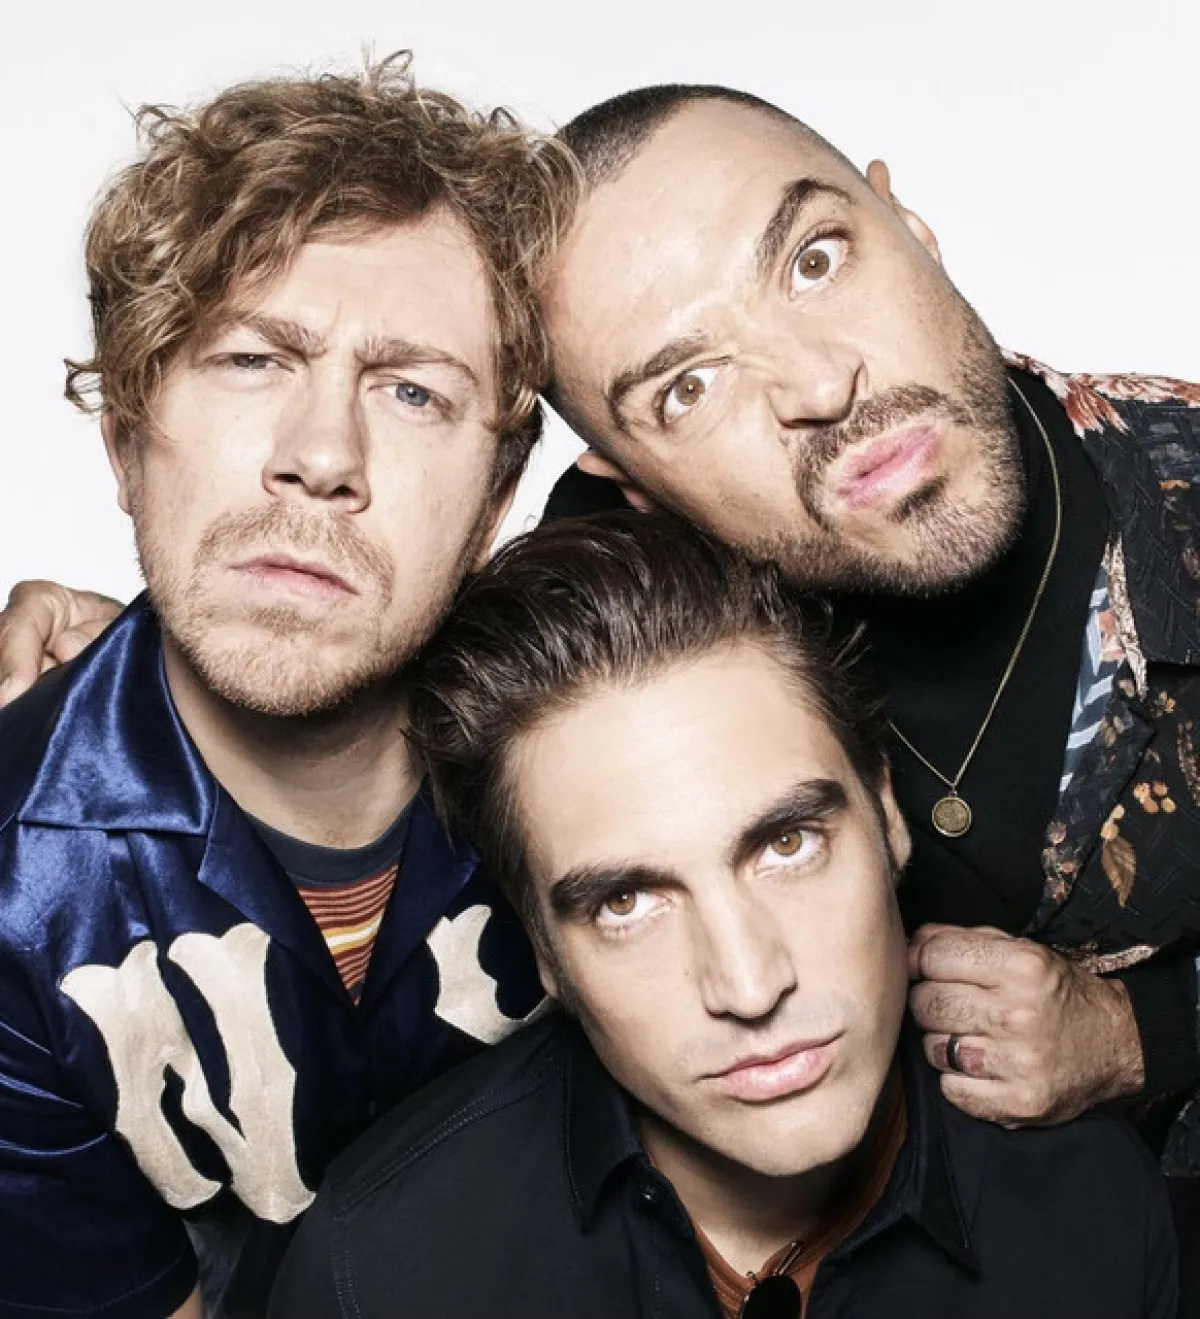 Busted en Dreamland Margate Tickets